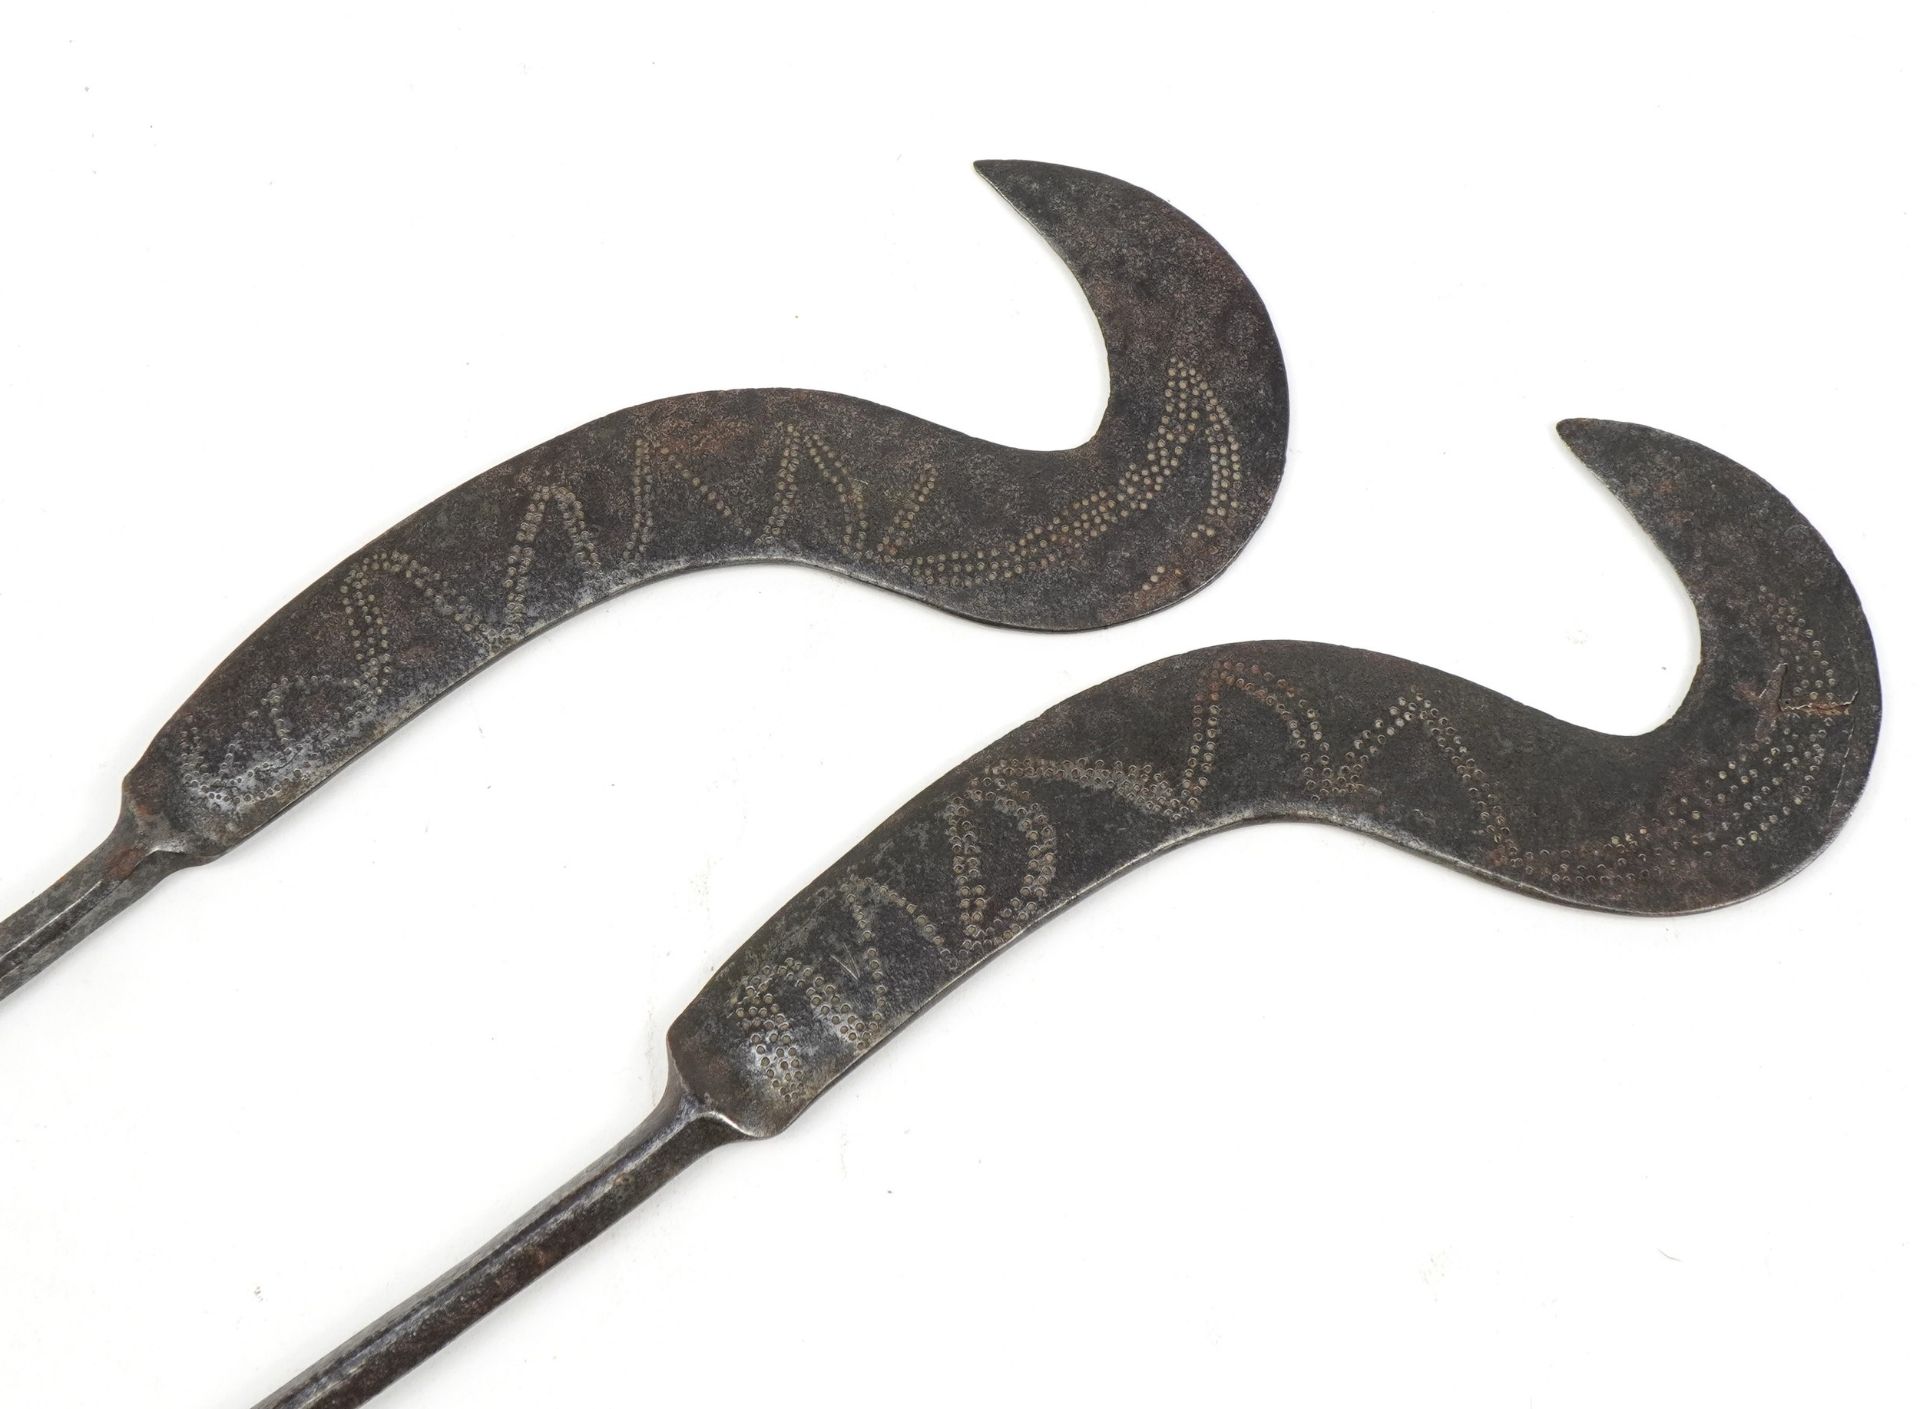 Pair of Asian or African steel banana knives with wooden handles, 49.5cm in length